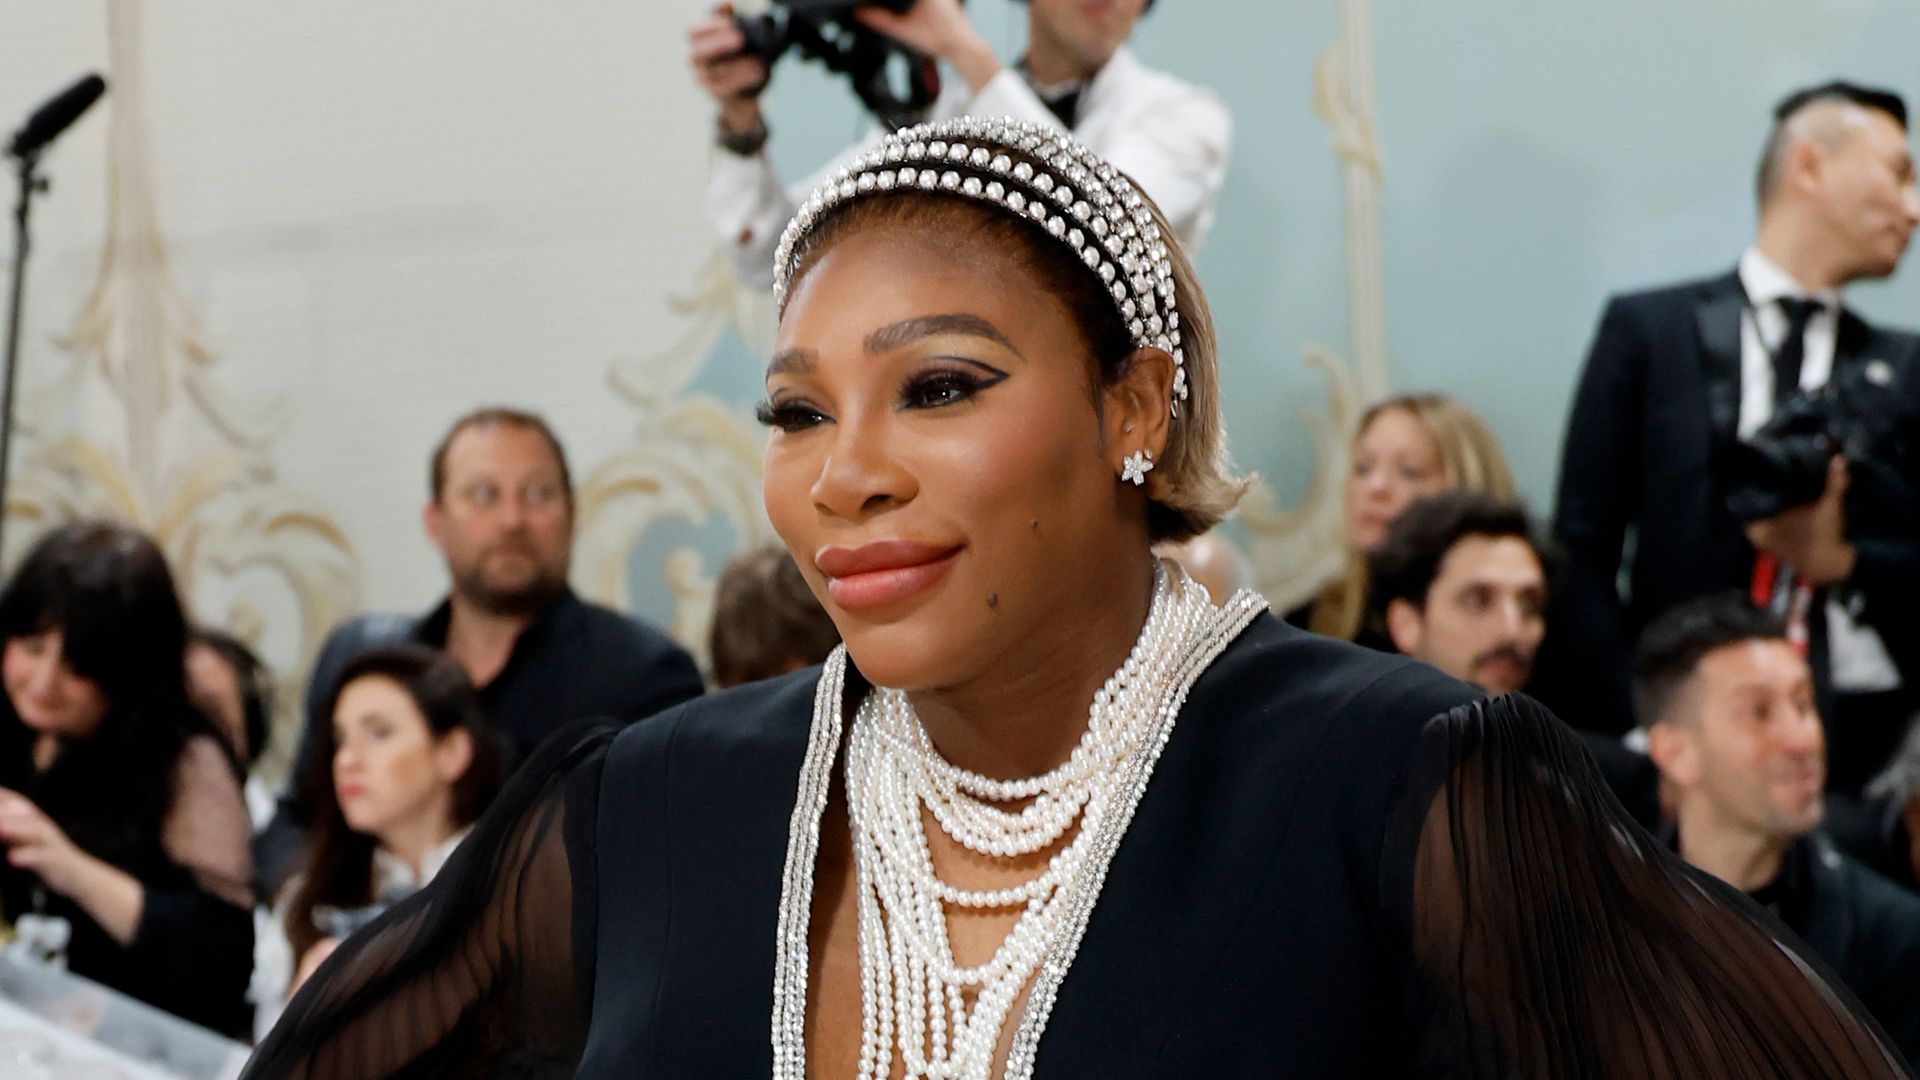 Serena Williams Celebrates Pregnancy at 'Pre-Push Party' With